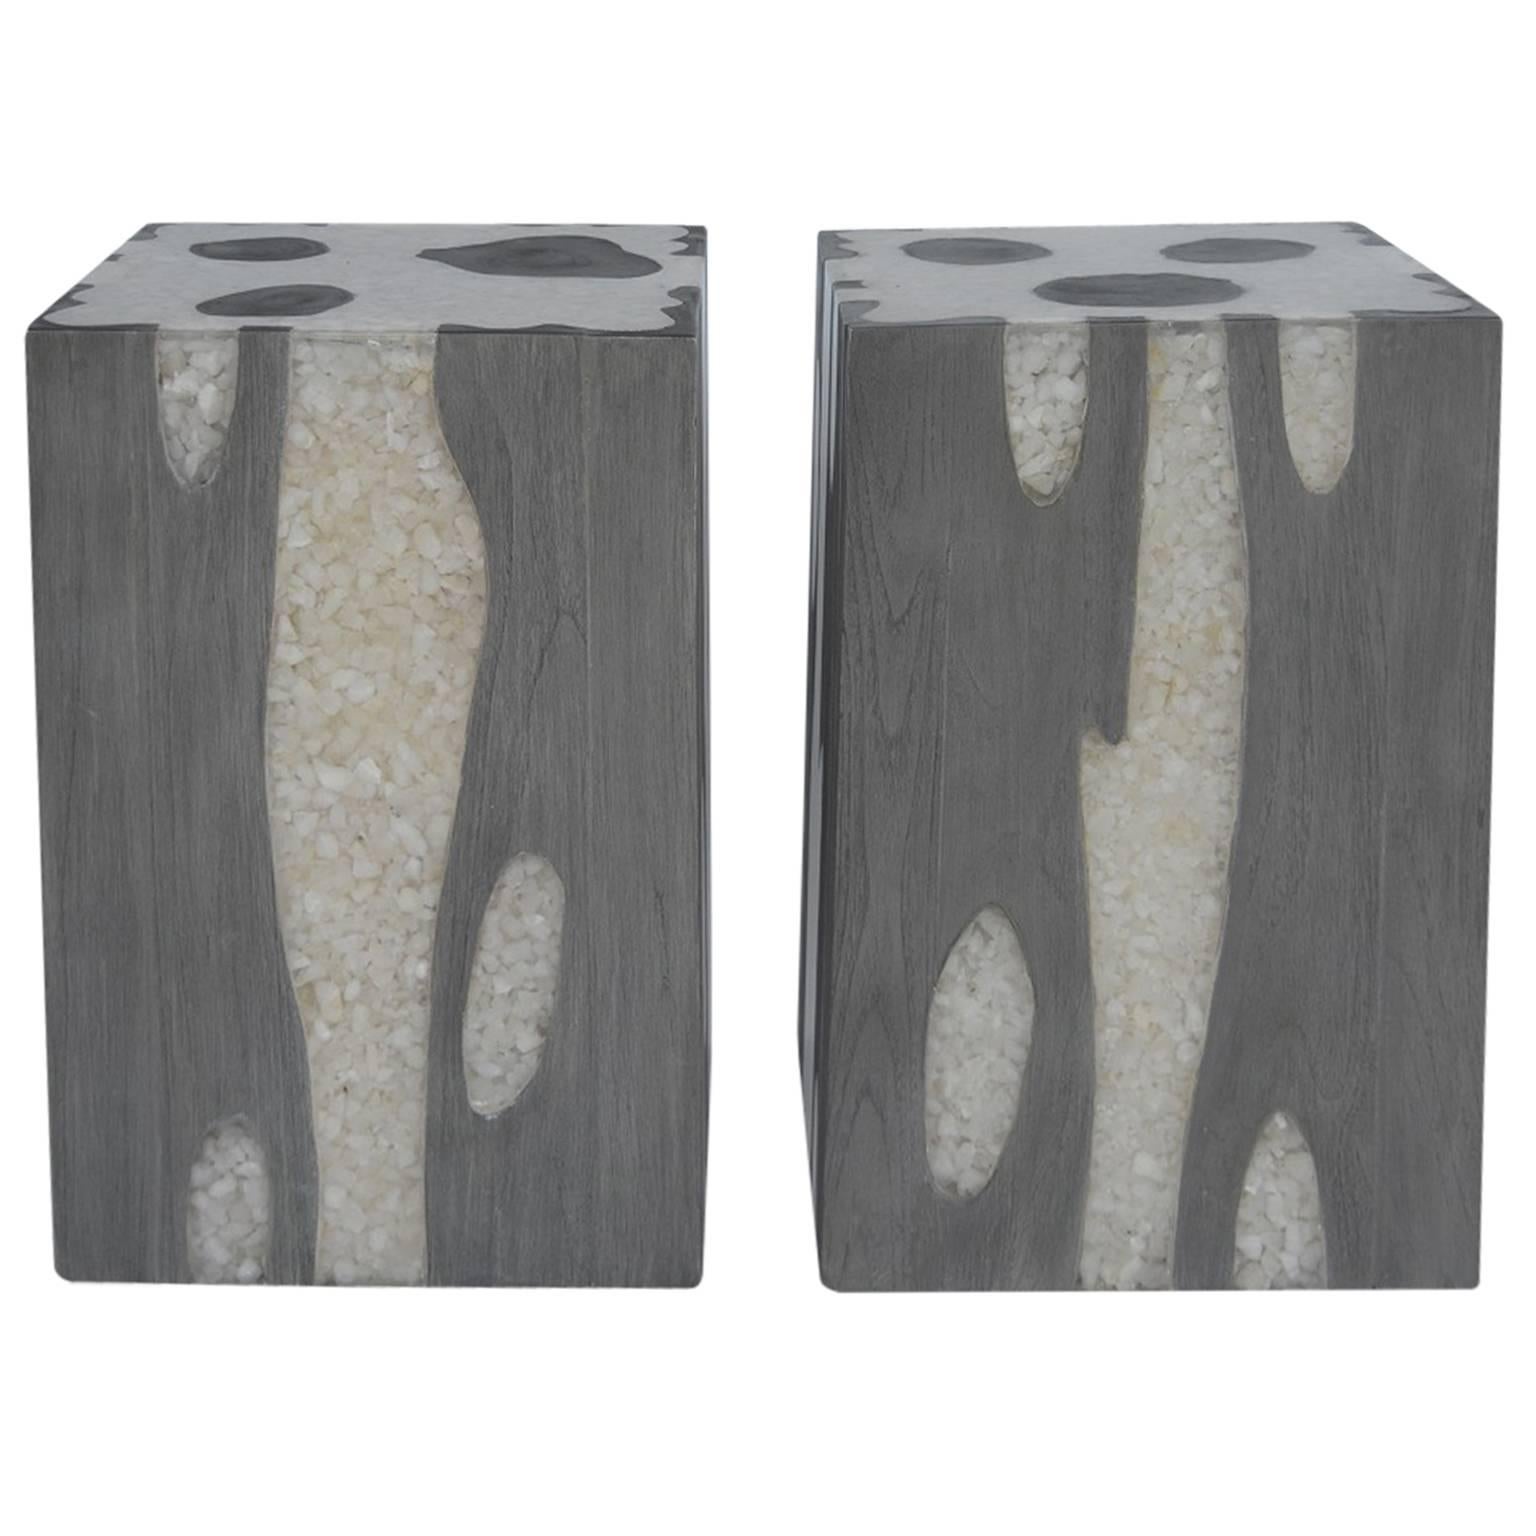 Pair of Resin and Wood Stools/Side Tables